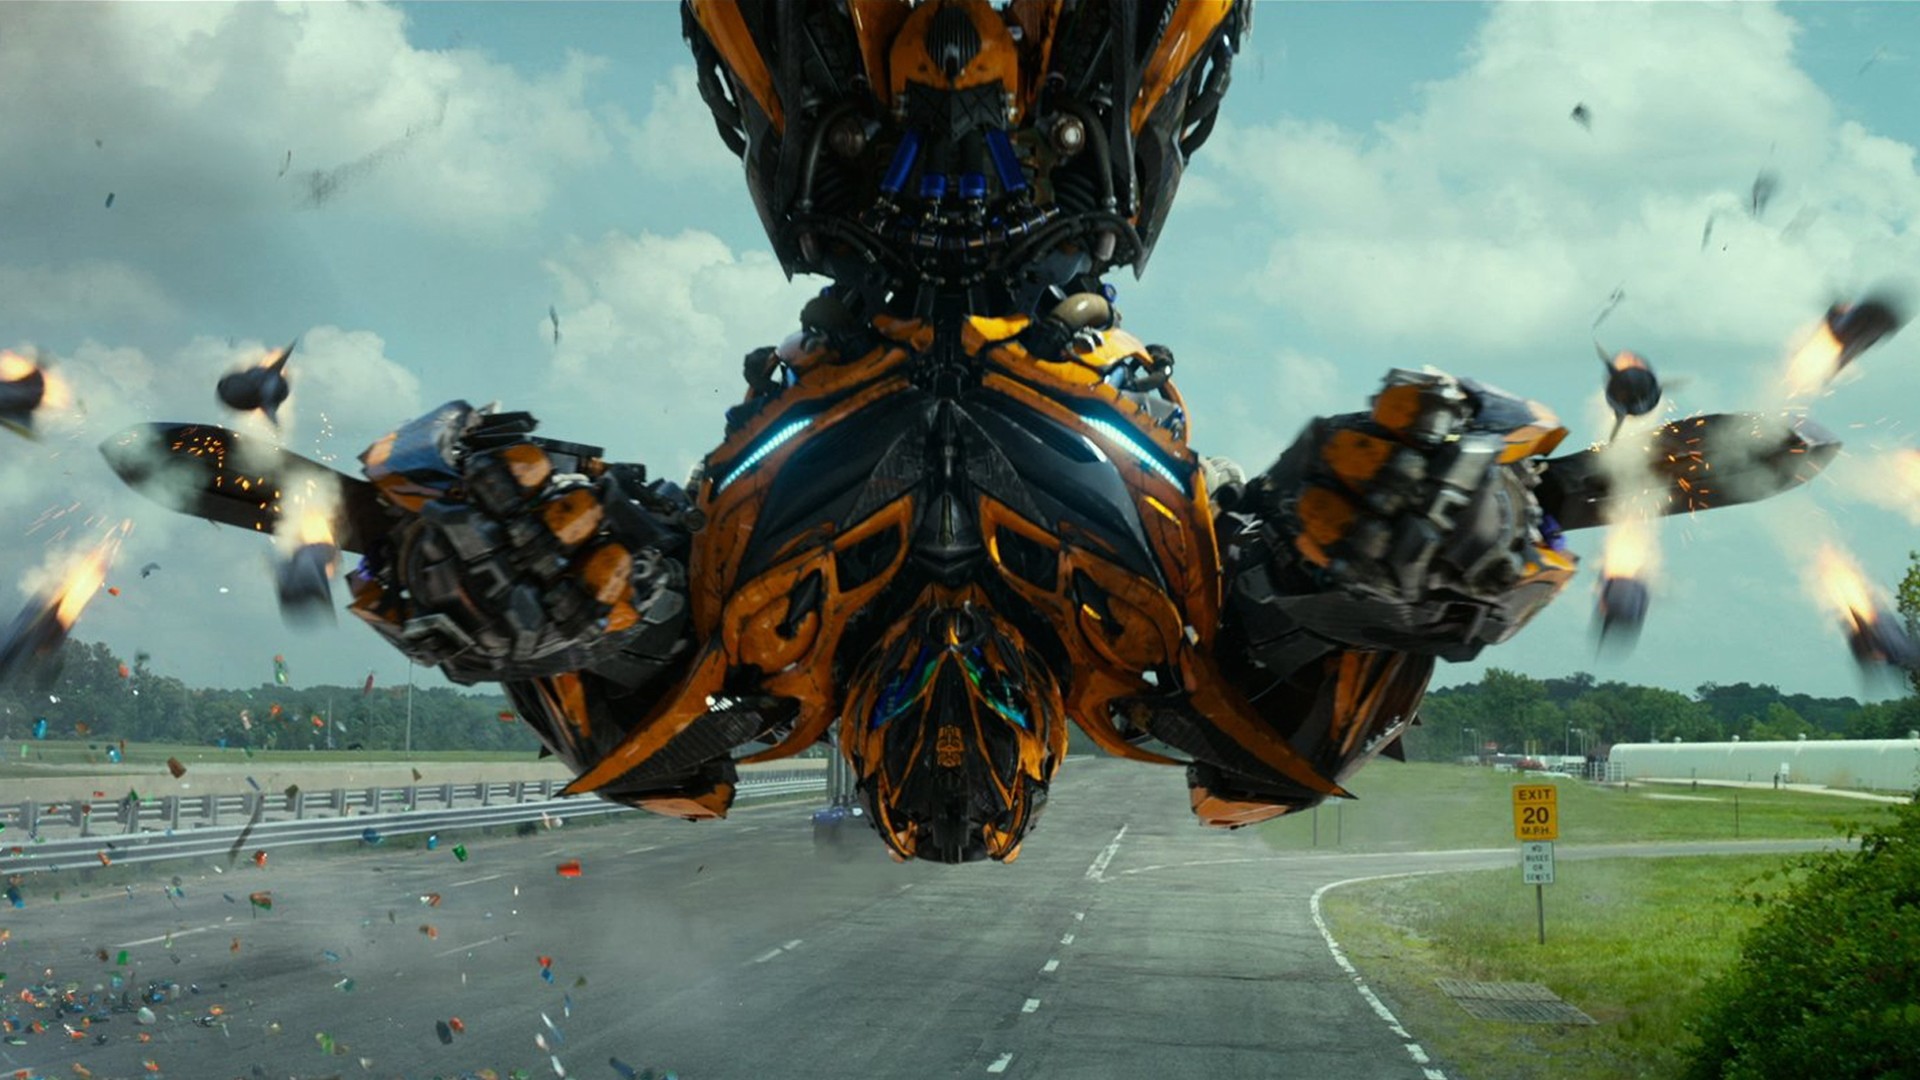 1920x1080 Transformers Age Of Extinction Hd Bumblebee